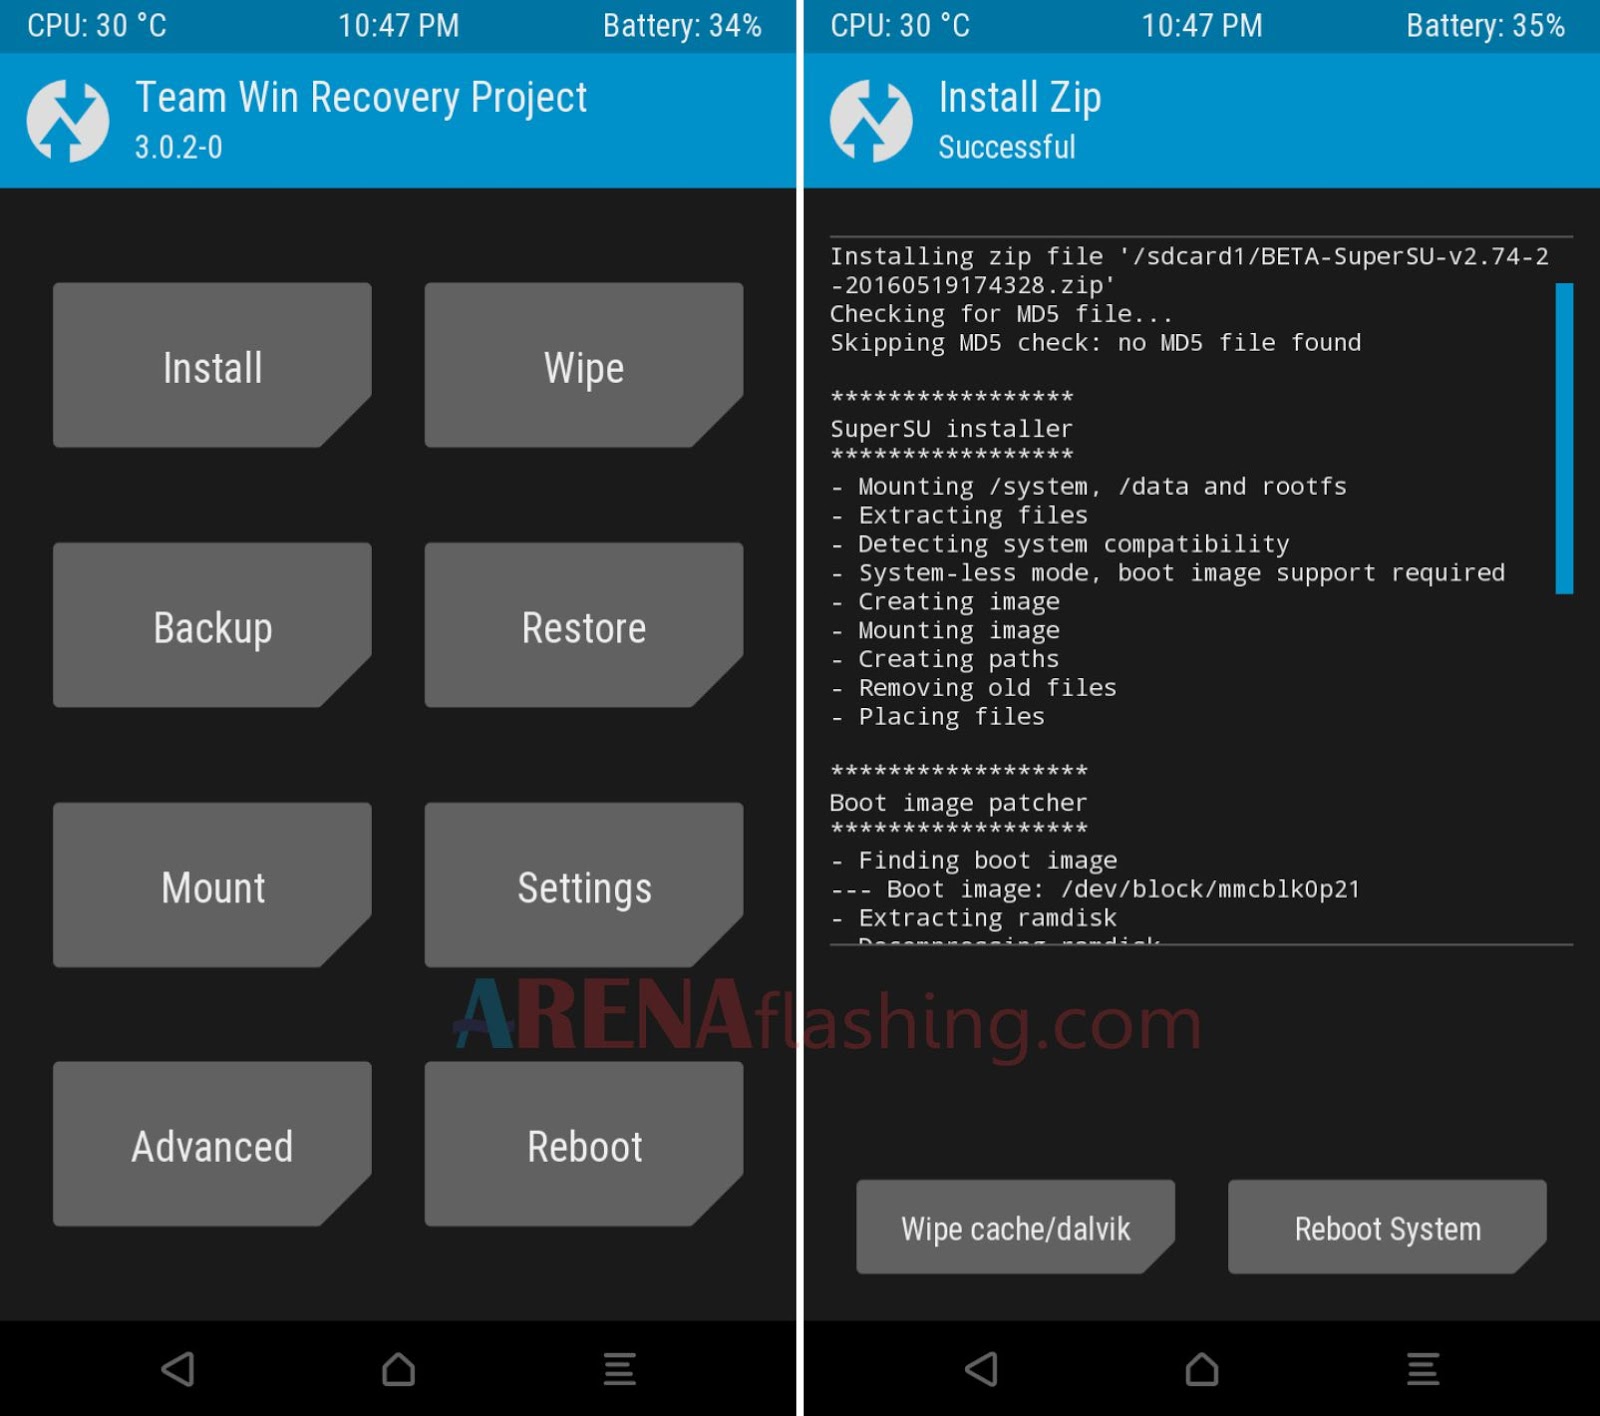 TWRP 3.5. TWRP_3.2.3-1. Team win Recovery Project. Режим Recovery Mode TWRP. Redmi 8 twrp